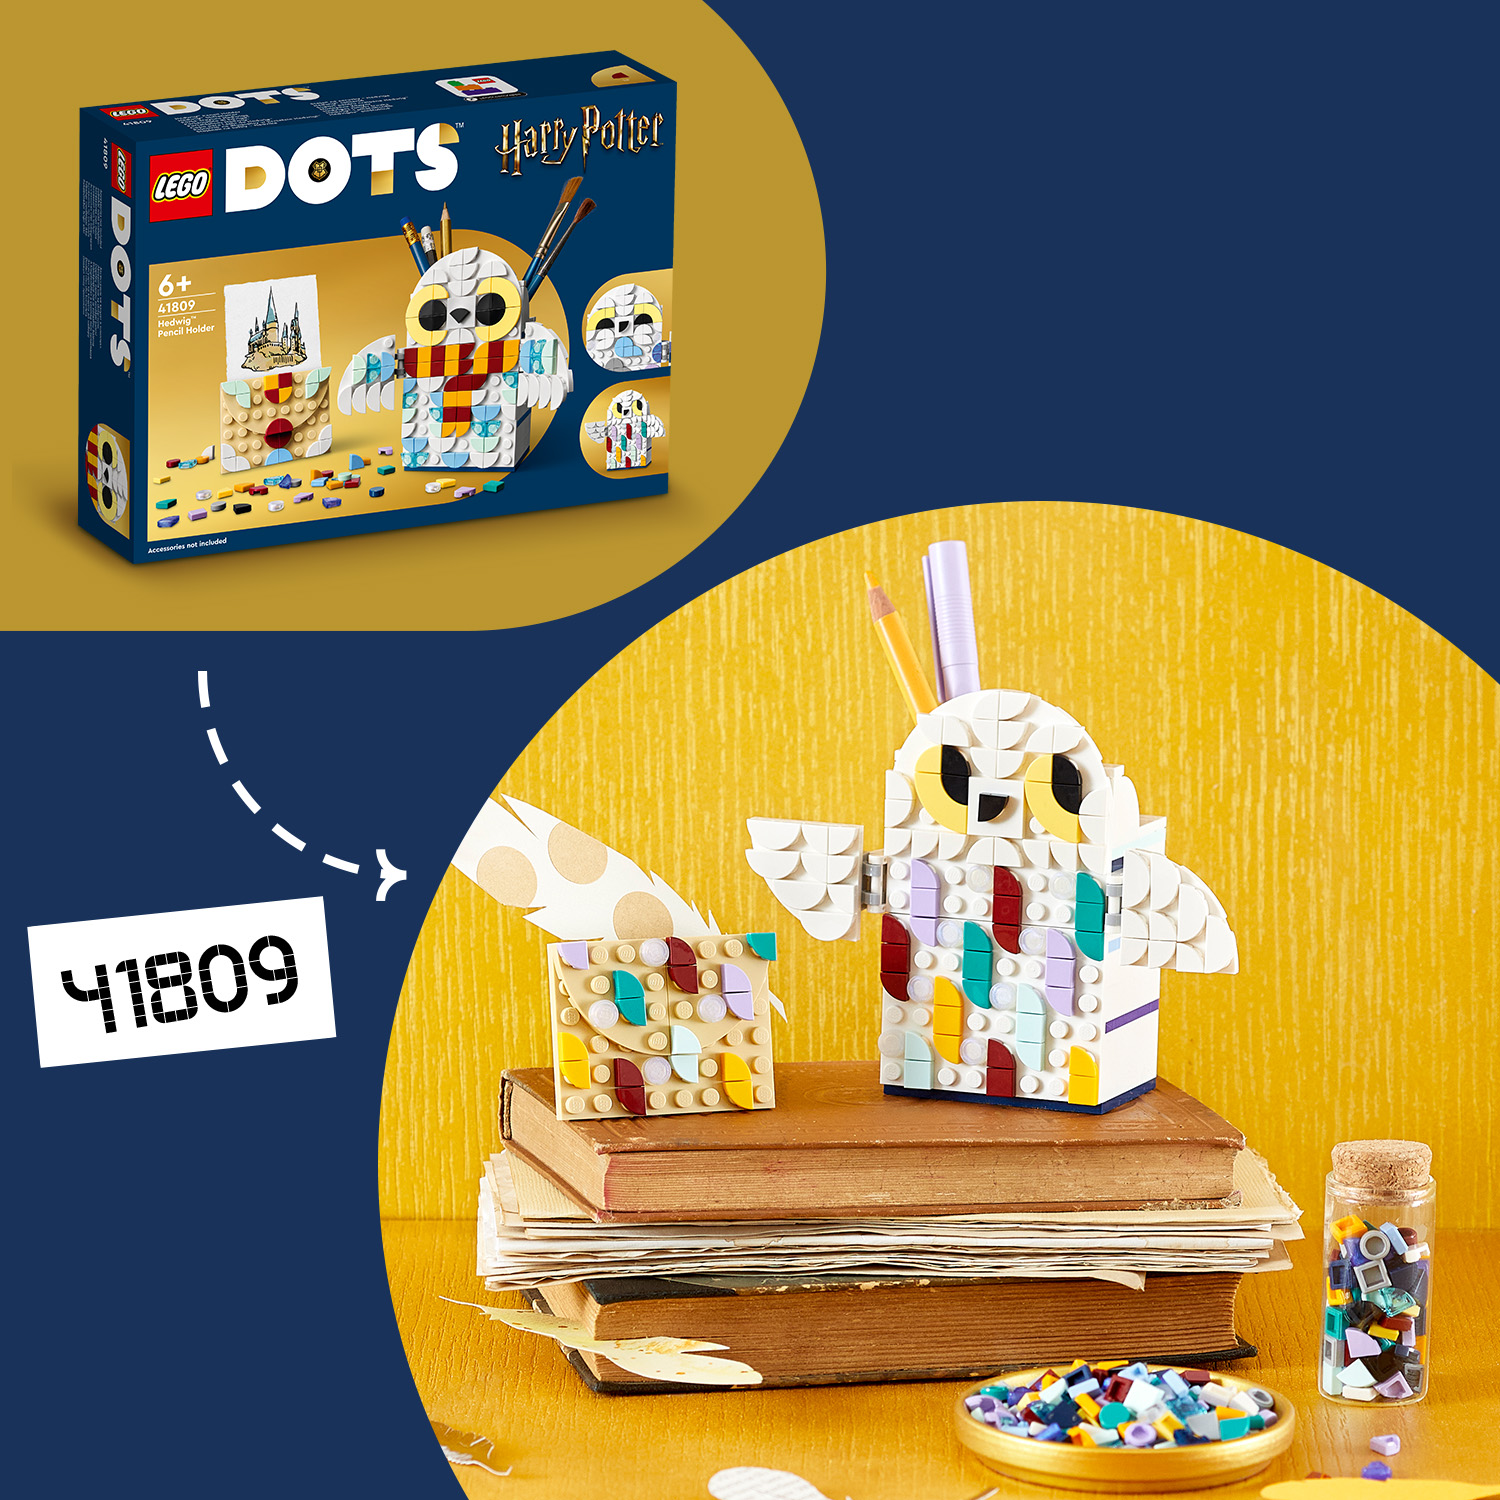 LEGO DOTS Hogwarts Desktop Kit 41811, DIY Harry Potter Back to School  Accessories and Supplies, Desk Décor Items and Patch Sticker, Crafts Toys 